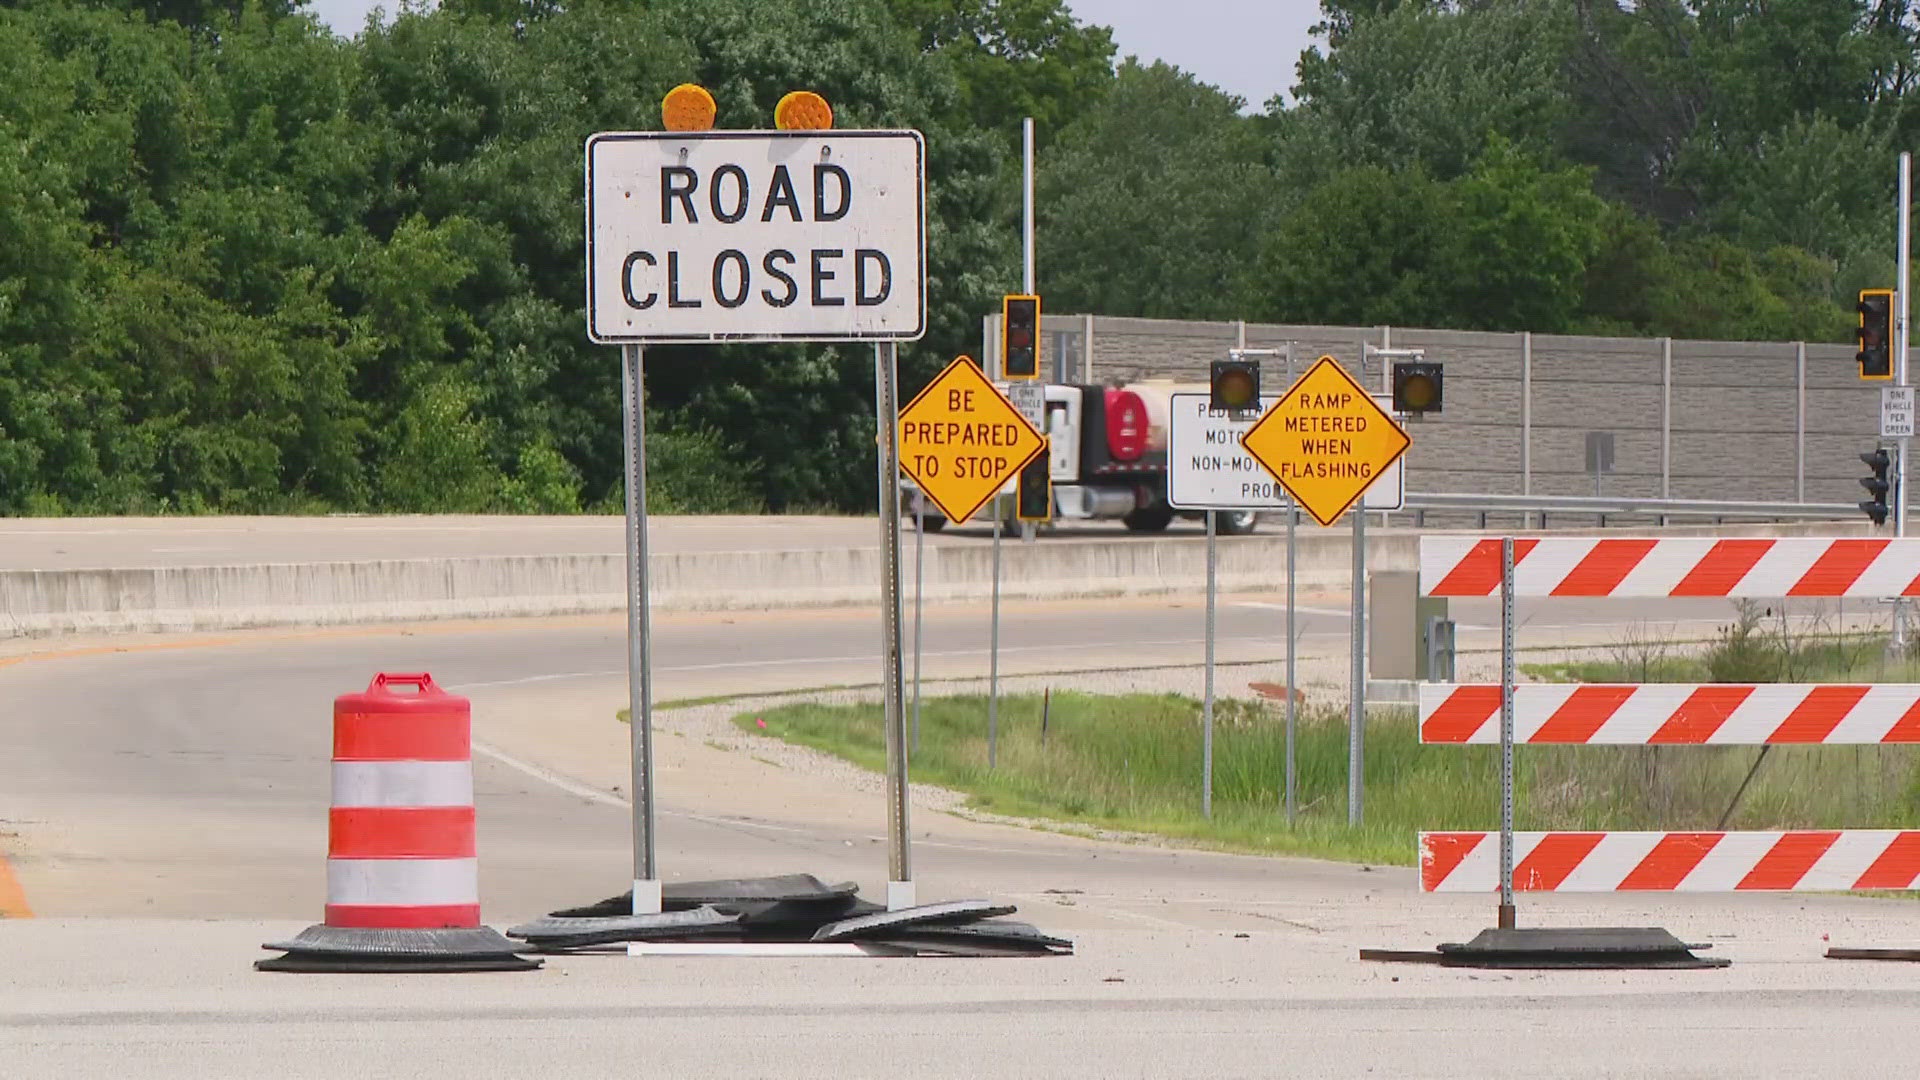 Local businesses along Washington Street said the closures of on- and off-ramps to I-465 have led to some confusion for their customers.